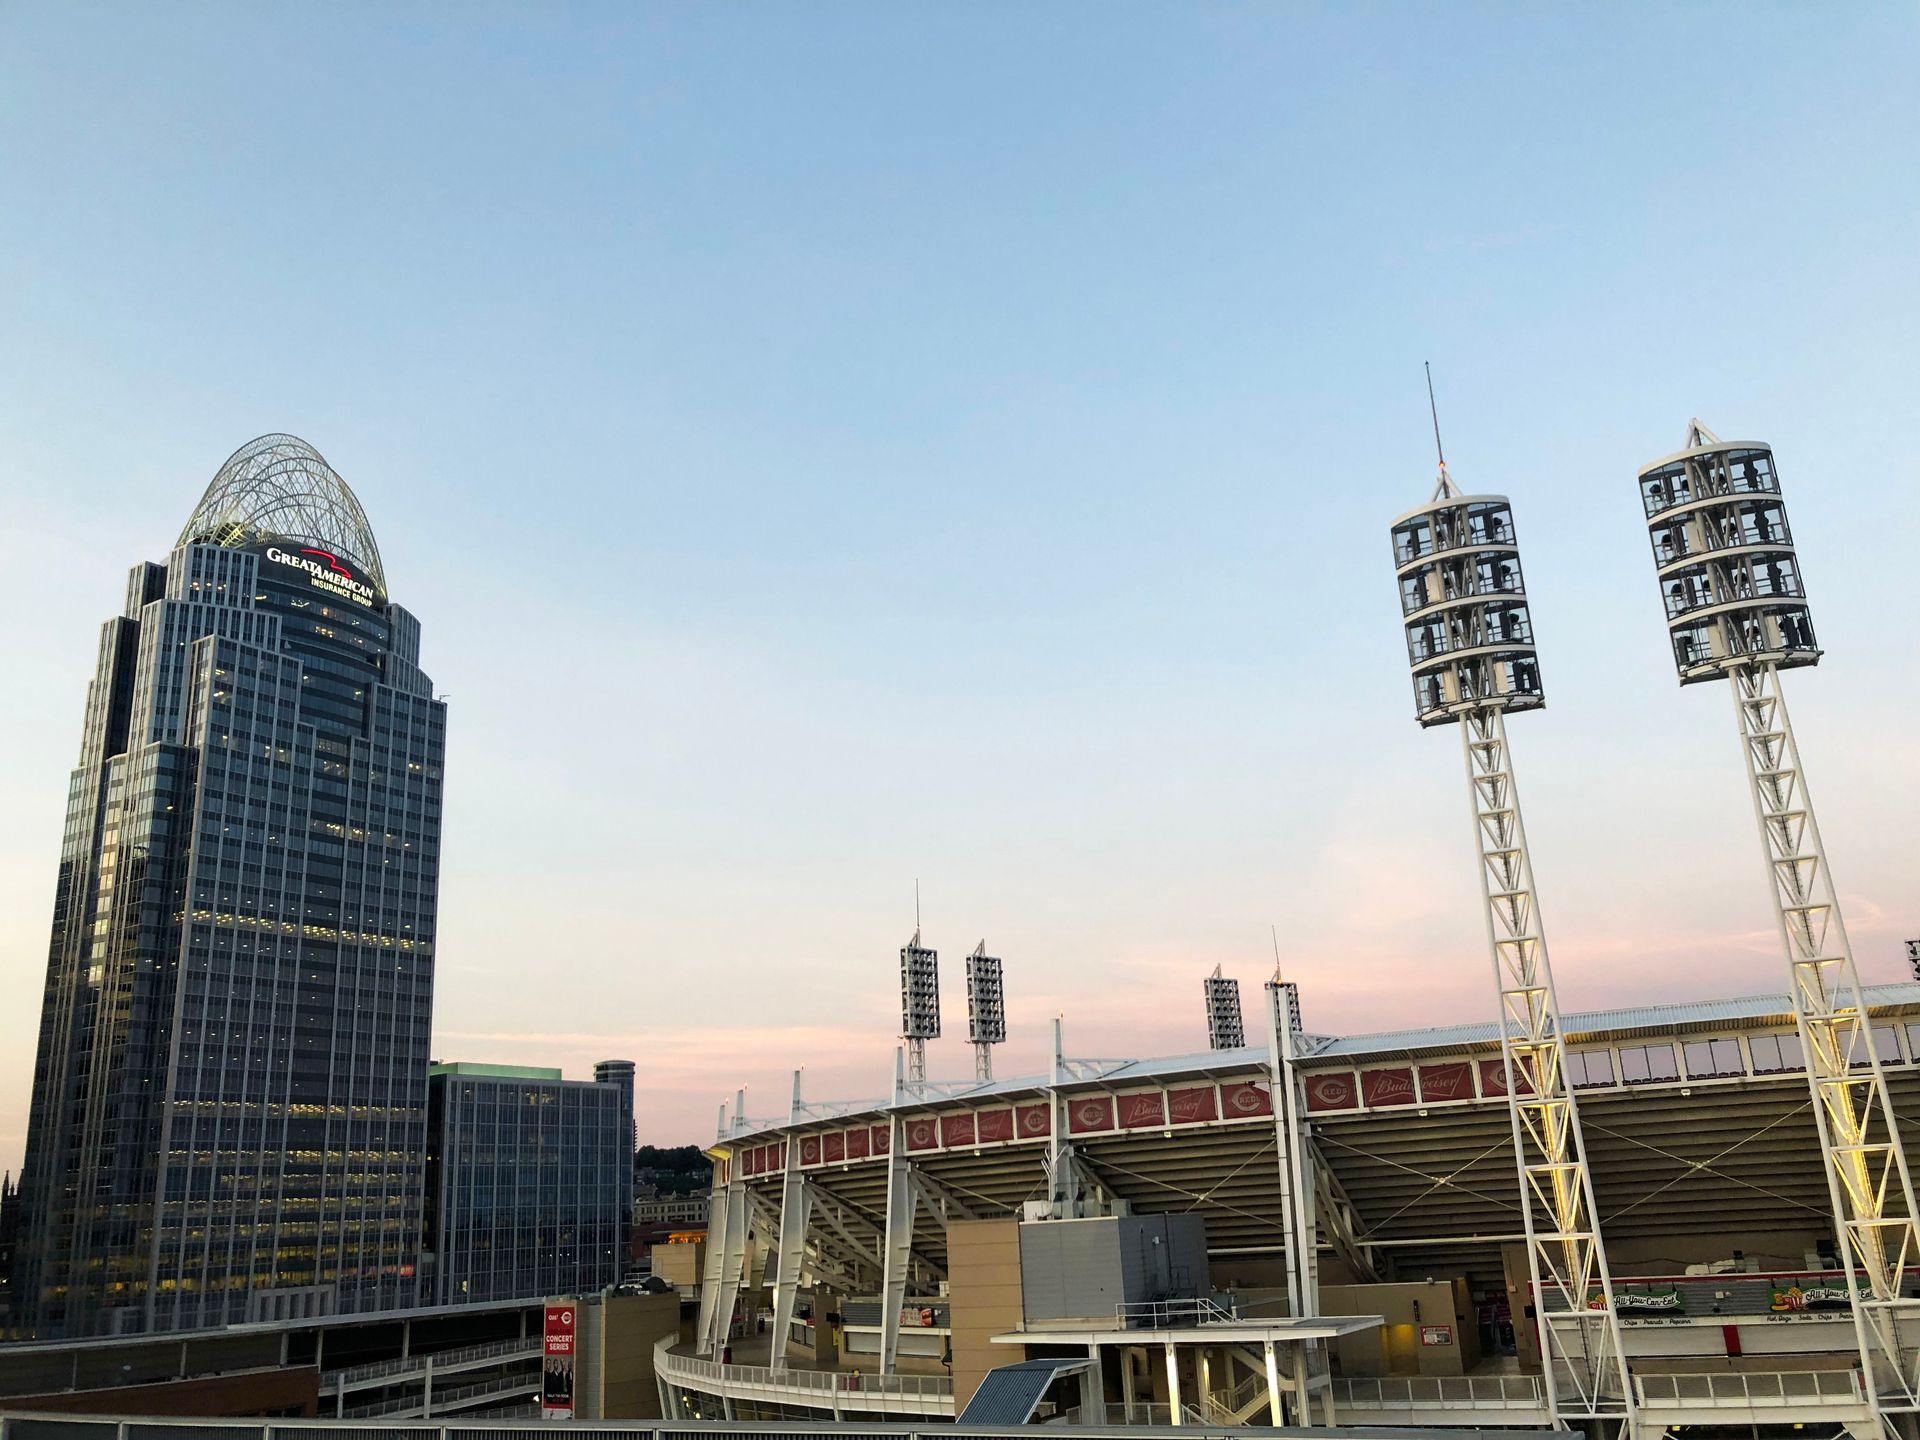 The Great American Tower next to the Great American Ballpark